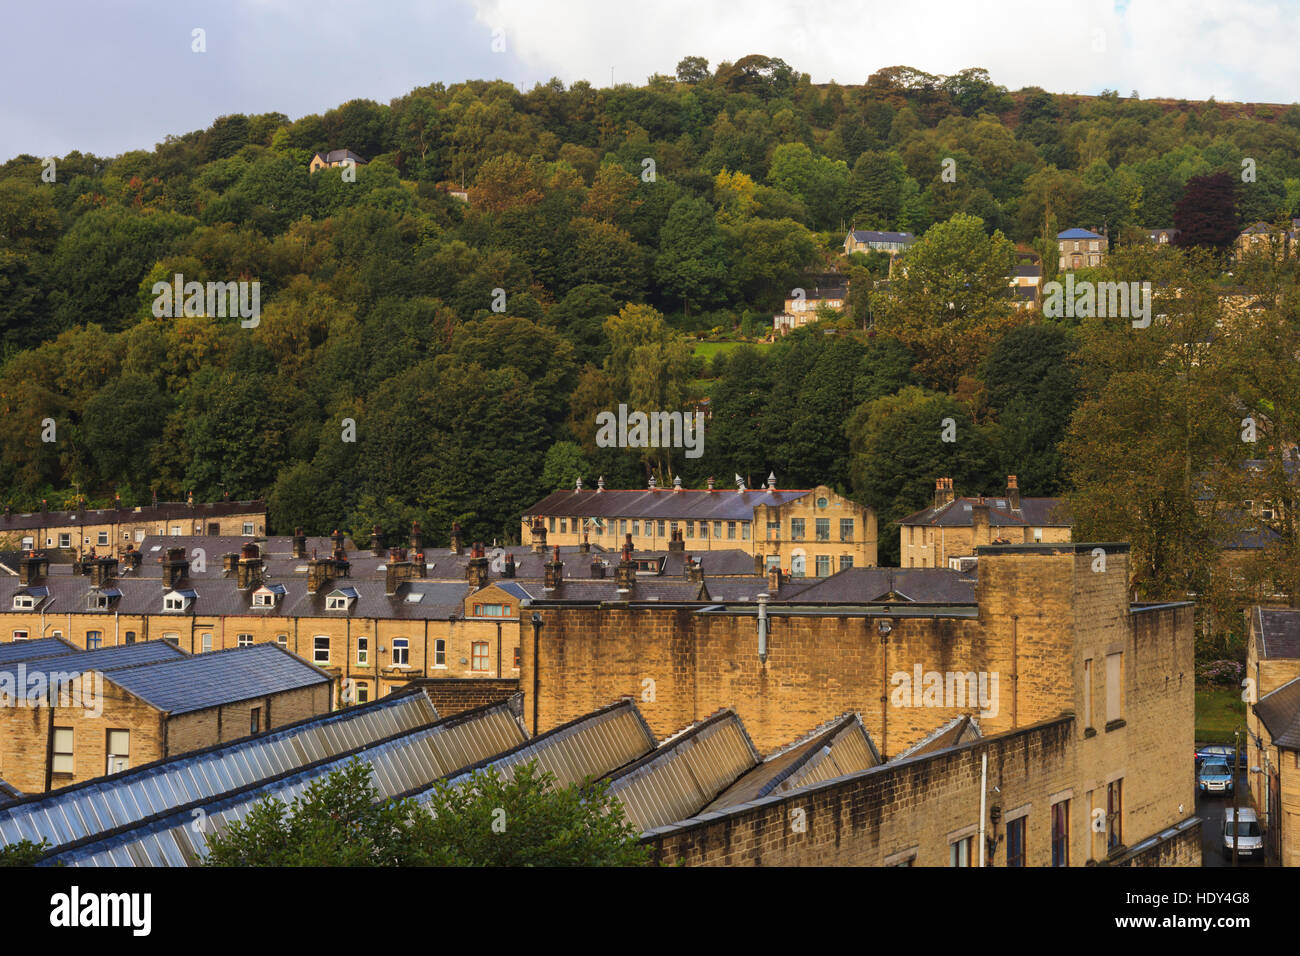 View of the Yorkshire mill town of Hebden Bridge, from Keighley Road, Calderdale, West Yorkshire, England UKterer Stock Photo